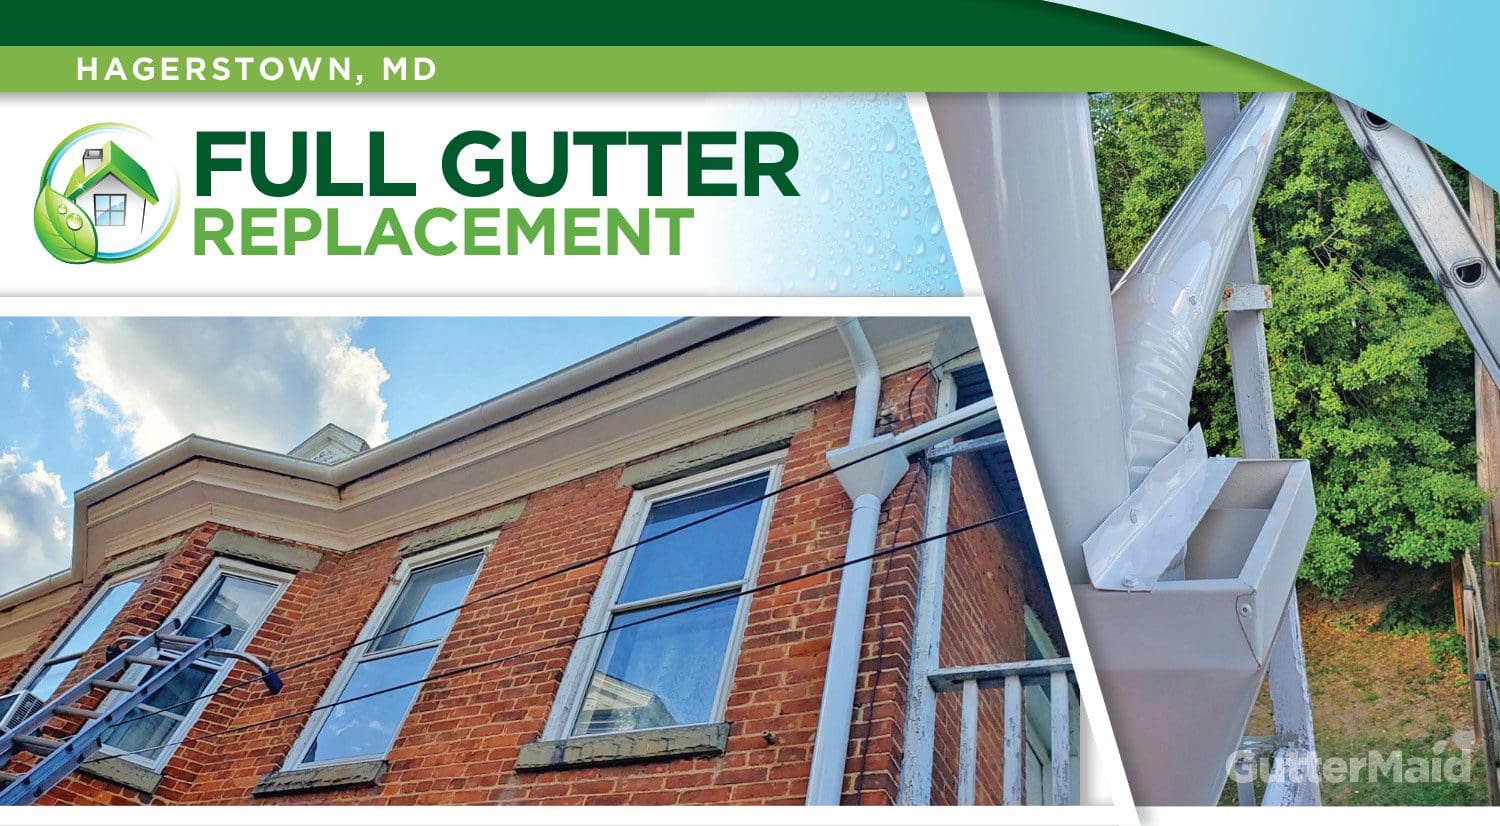 Full gutter replacement services in Hagerstown MD